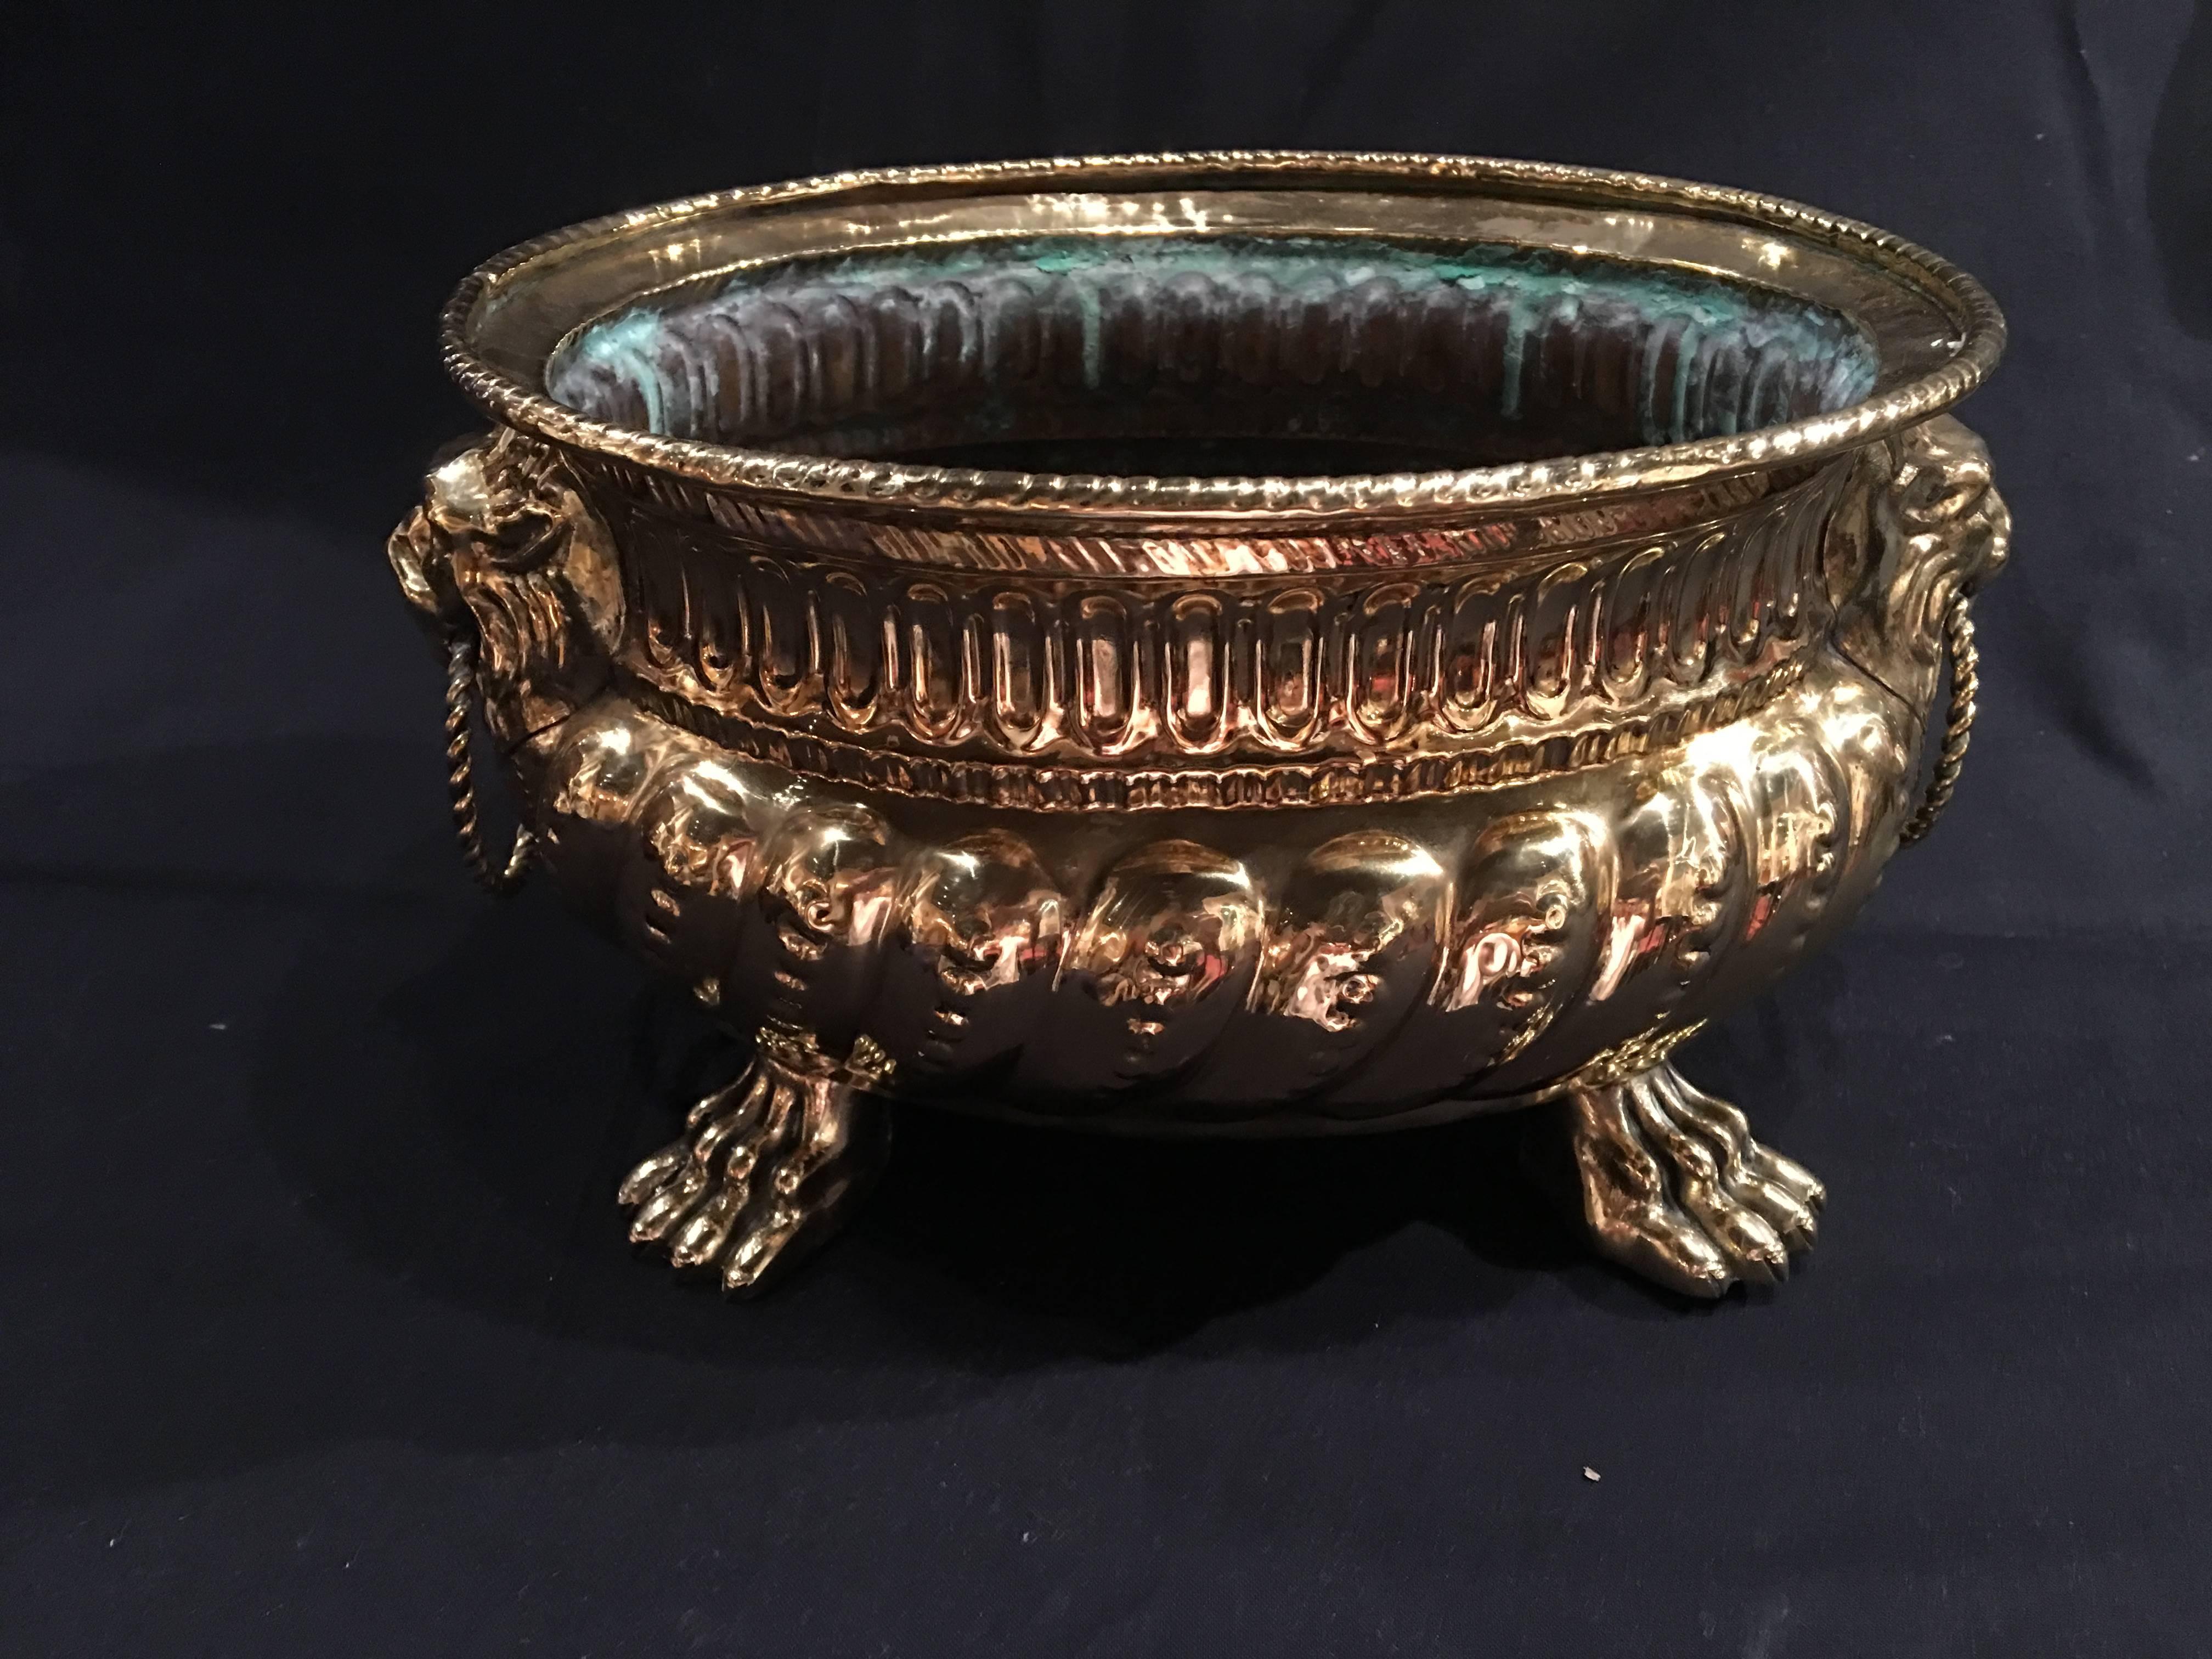 French polished brass round jardiniere or planter with handles, 19th century.